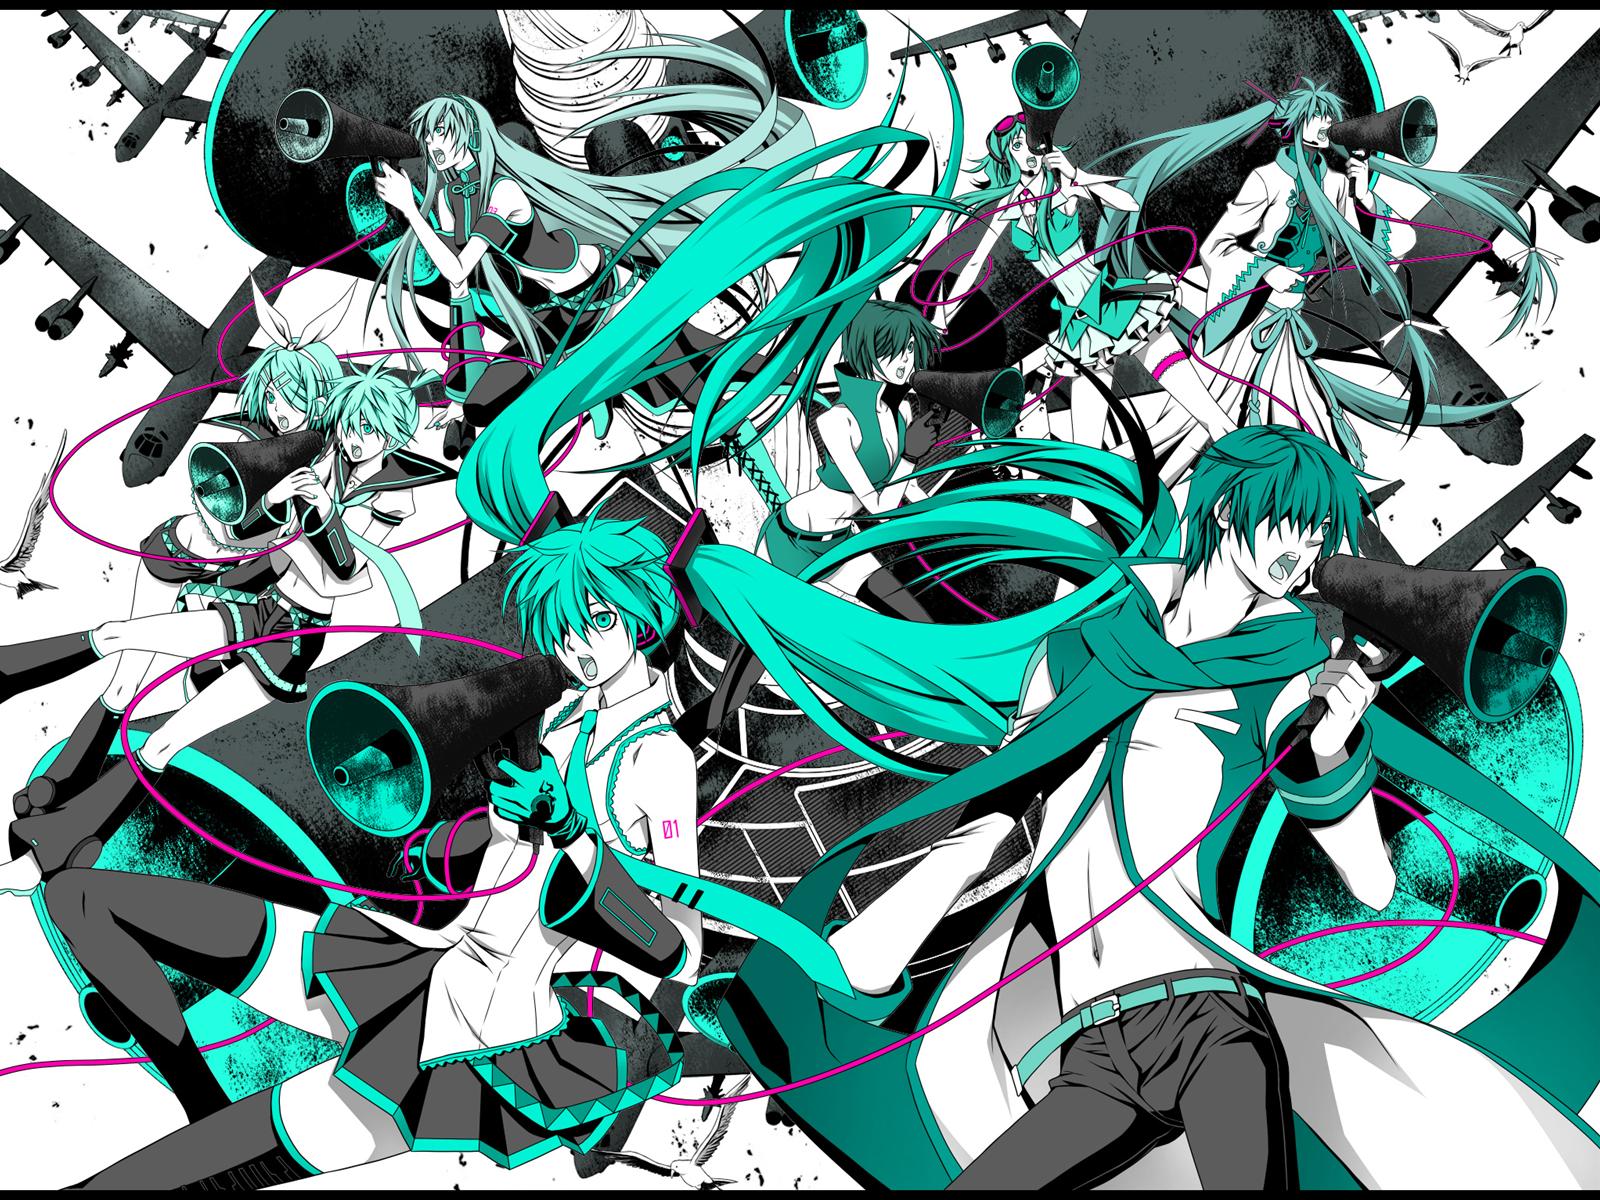 Vocaloid ボーカロイド 壁紙家 初音ミク その他複数 壁紙no 61 63